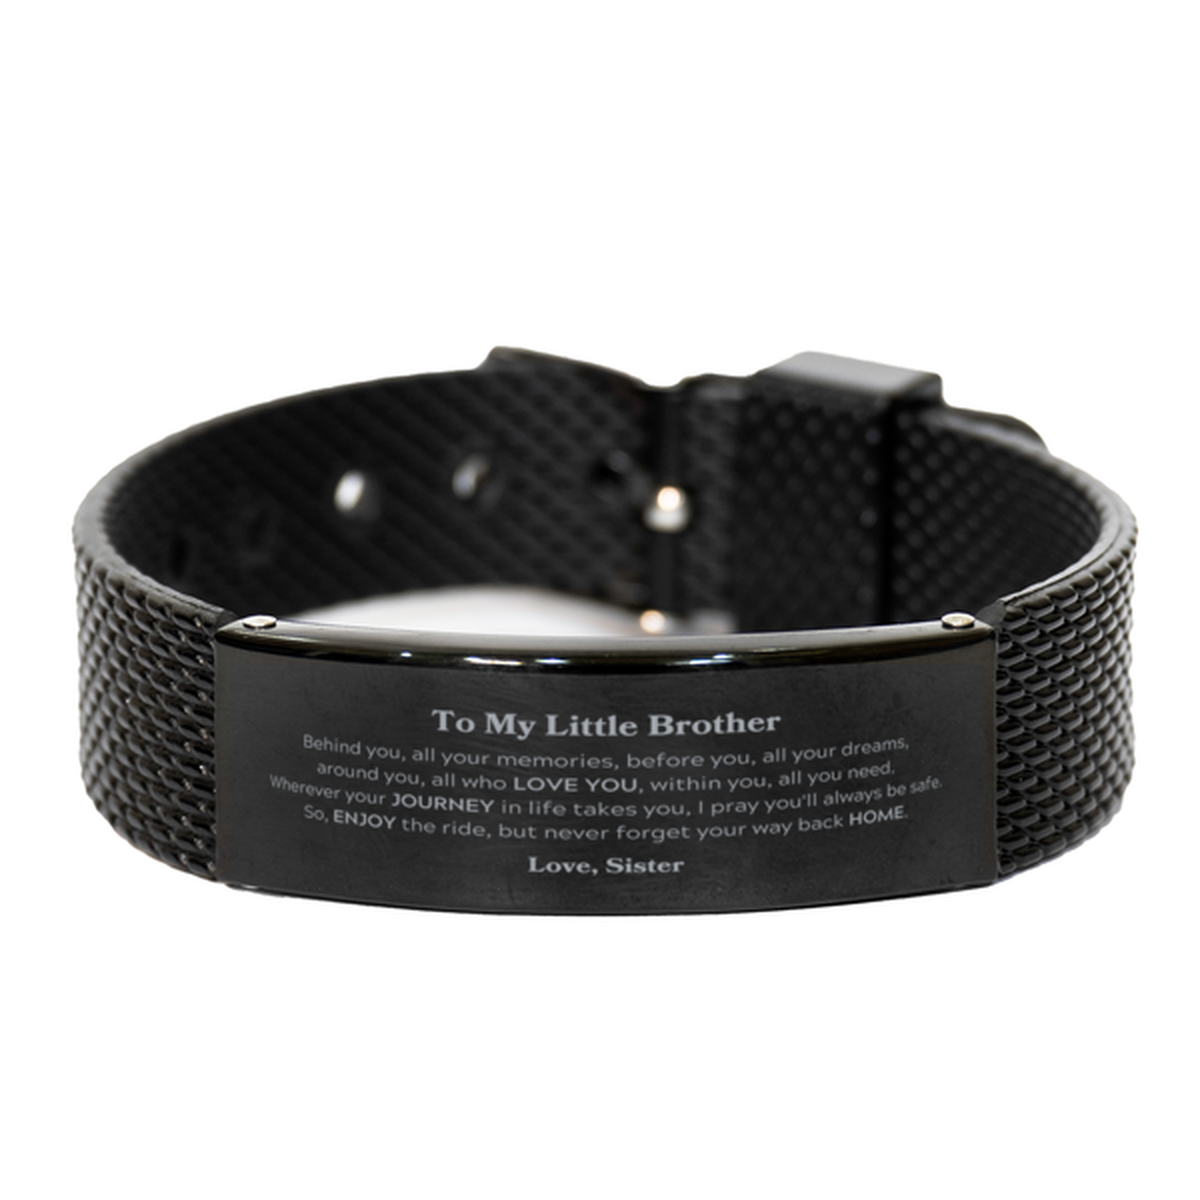 To My Little Brother Graduation Gifts from Sister, Little Brother Black Shark Mesh Bracelet Christmas Birthday Gifts for Little Brother Behind you, all your memories, before you, all your dreams. Love, Sister